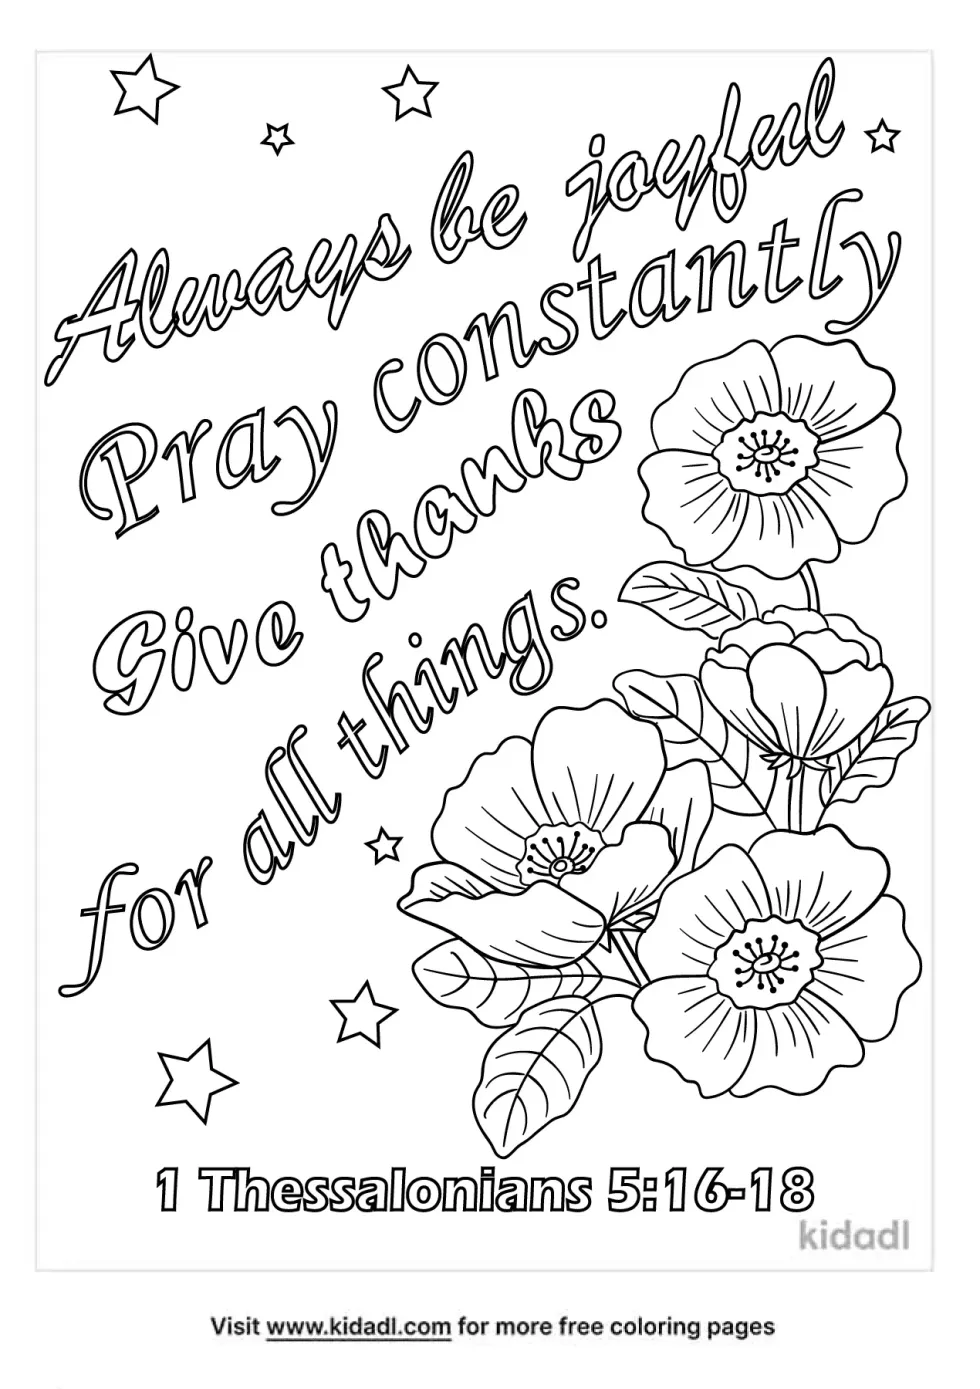 1 Thessalonians 5:16-18 Coloring Page